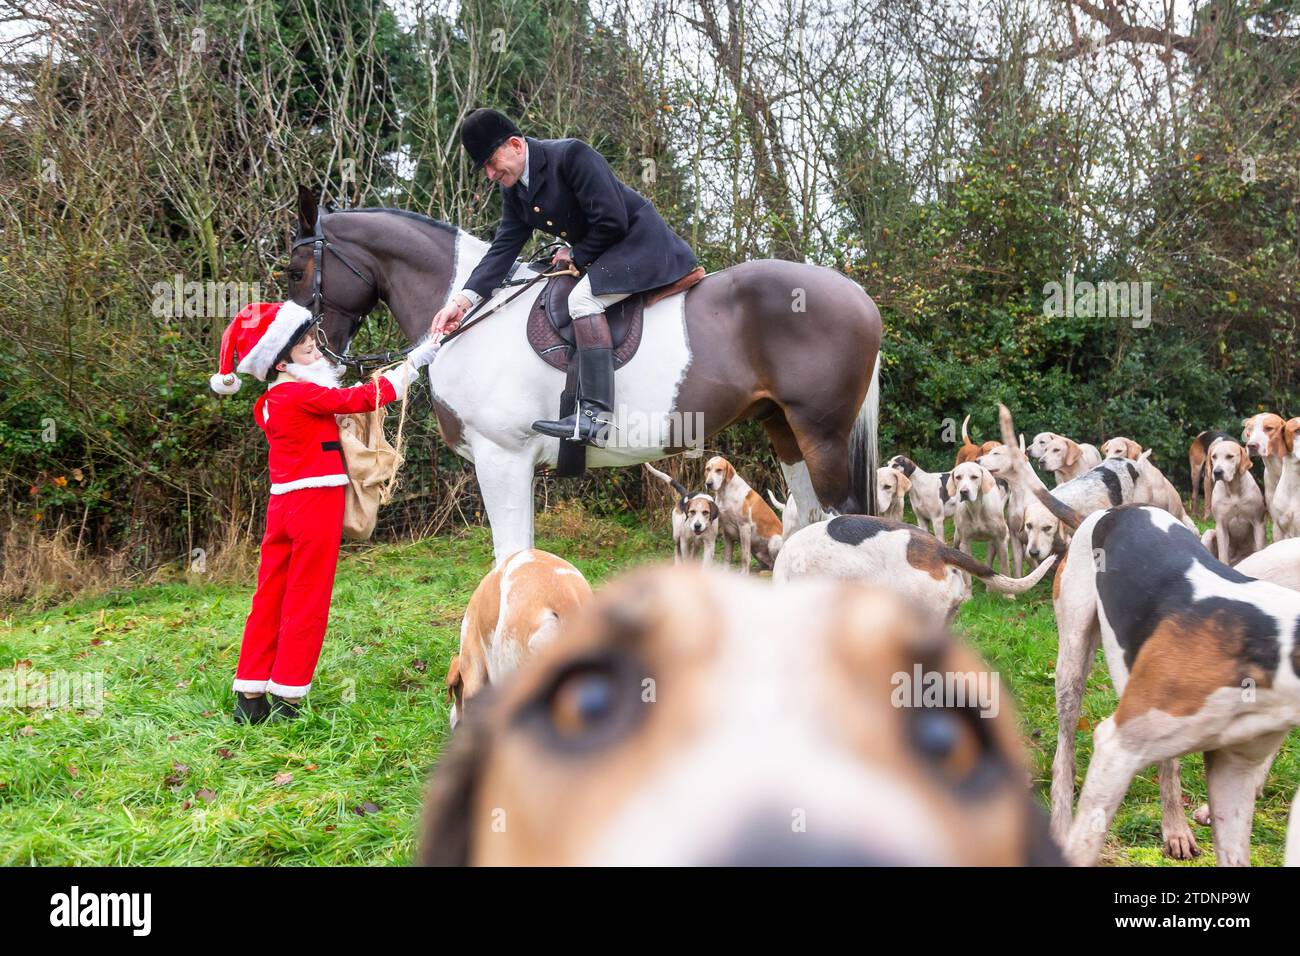 Upper Arley, Kidderminster, Worcestershire, UK. 19th Dec, 2023. 10-year-old Henley Mills dressed as Santa Claus hands a chocolate bar to the Master of the Foxhounds of the Albrighton and Woodland hunt as they have a lawn meet and trail ride from a farm in Upper Arley, near Kidderminster in Worcestershire. Credit: Peter Lopeman/Alamy Live News Stock Photo